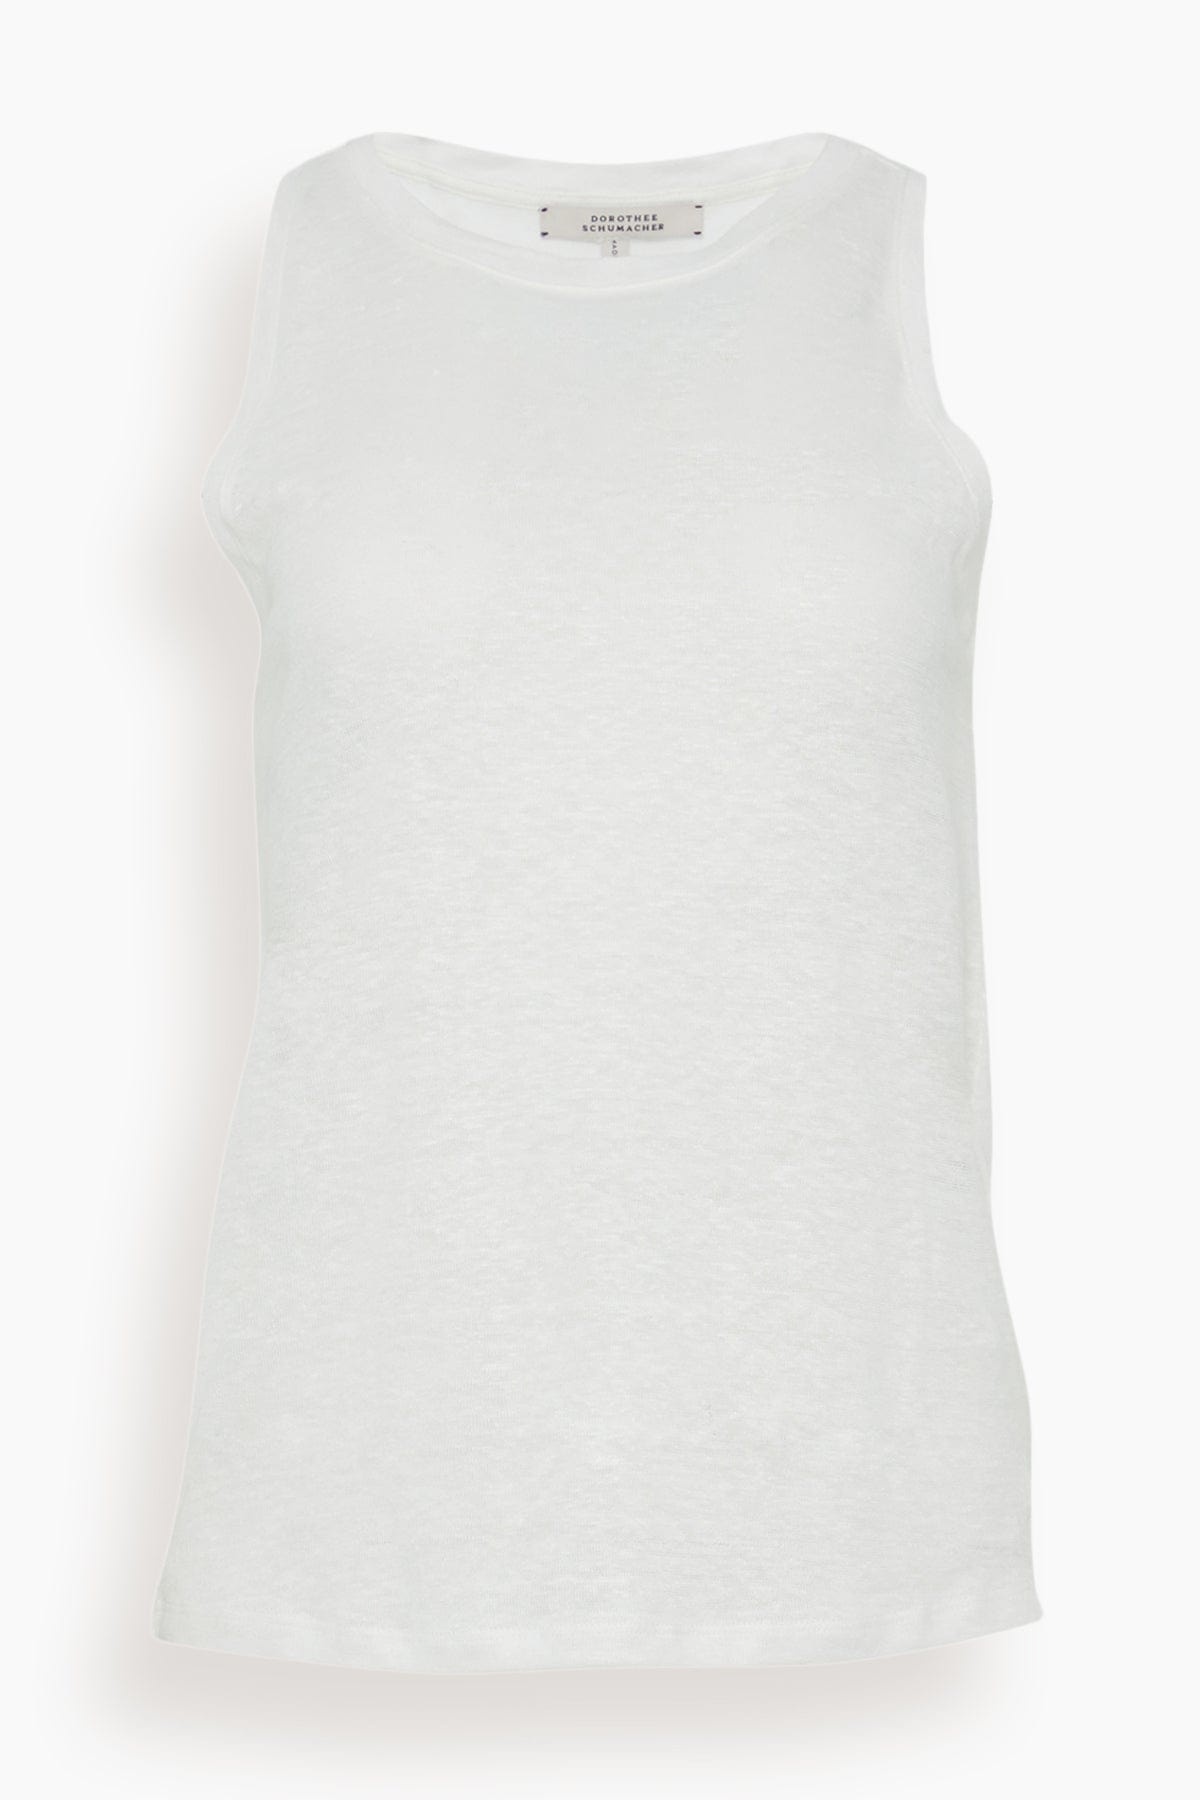 Natural Ease Sleeveless Top in Shaded White - 1